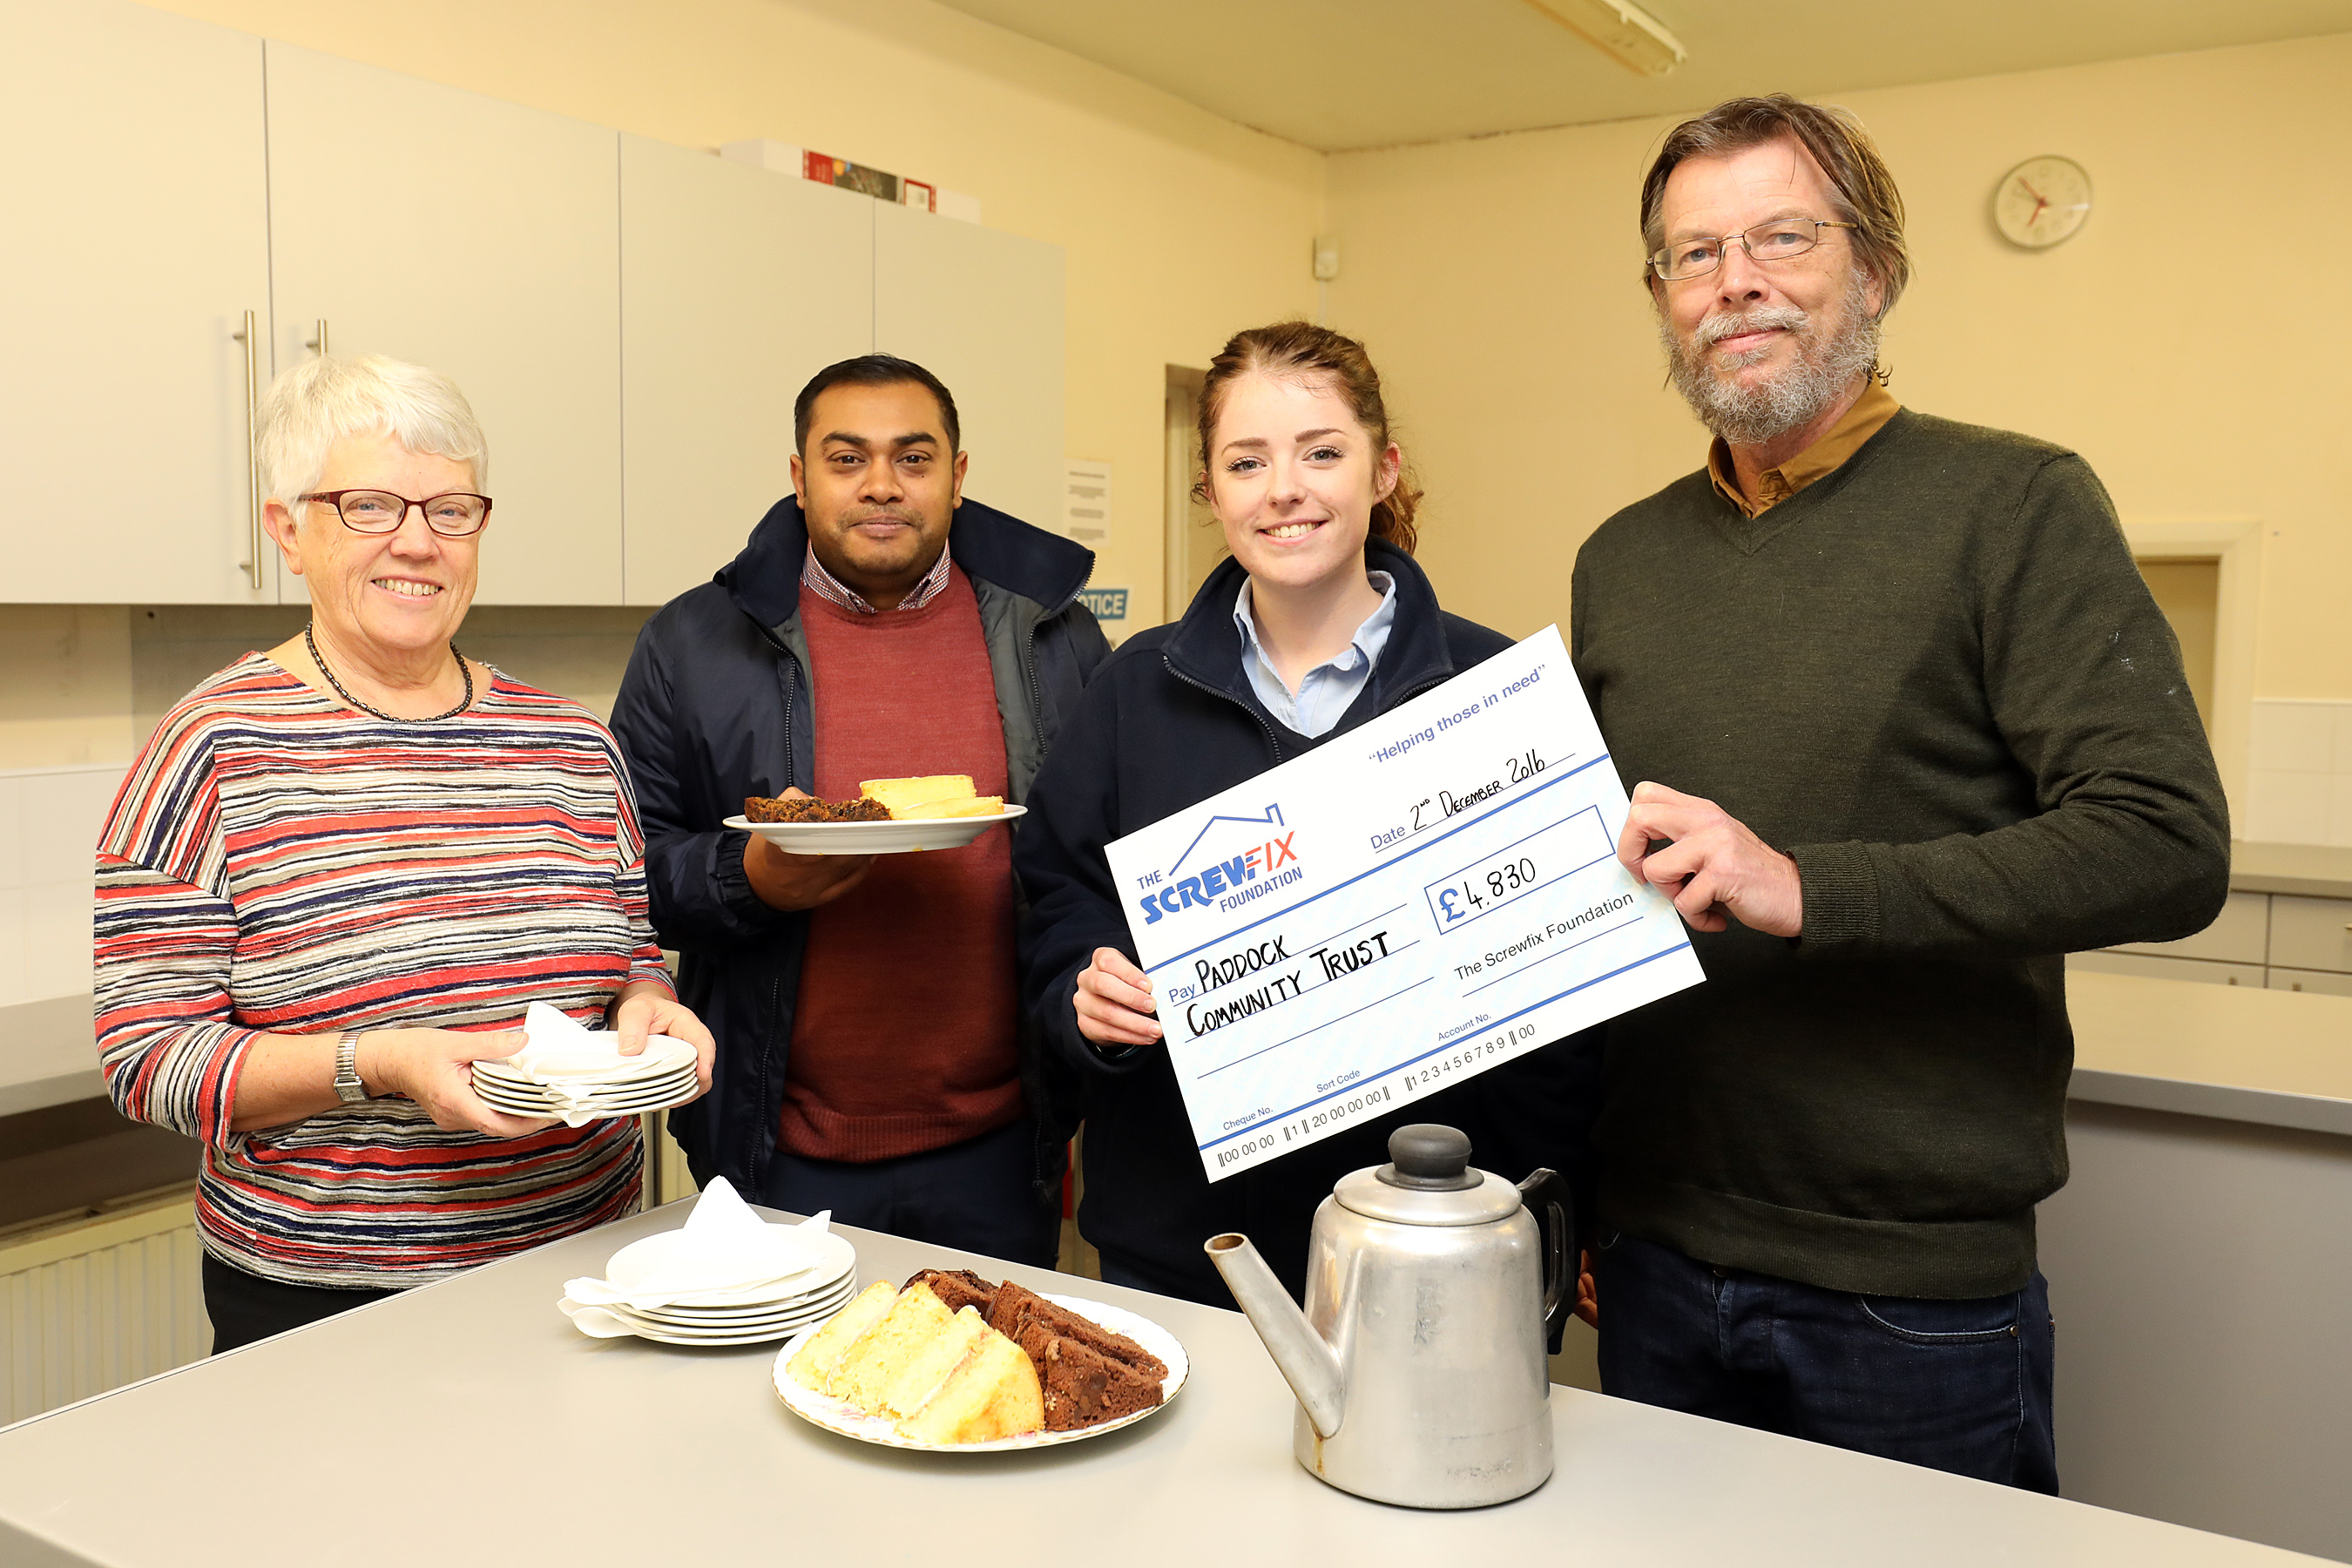 Paddock Community Trust gets a helping hand from The Screwfix Foundation